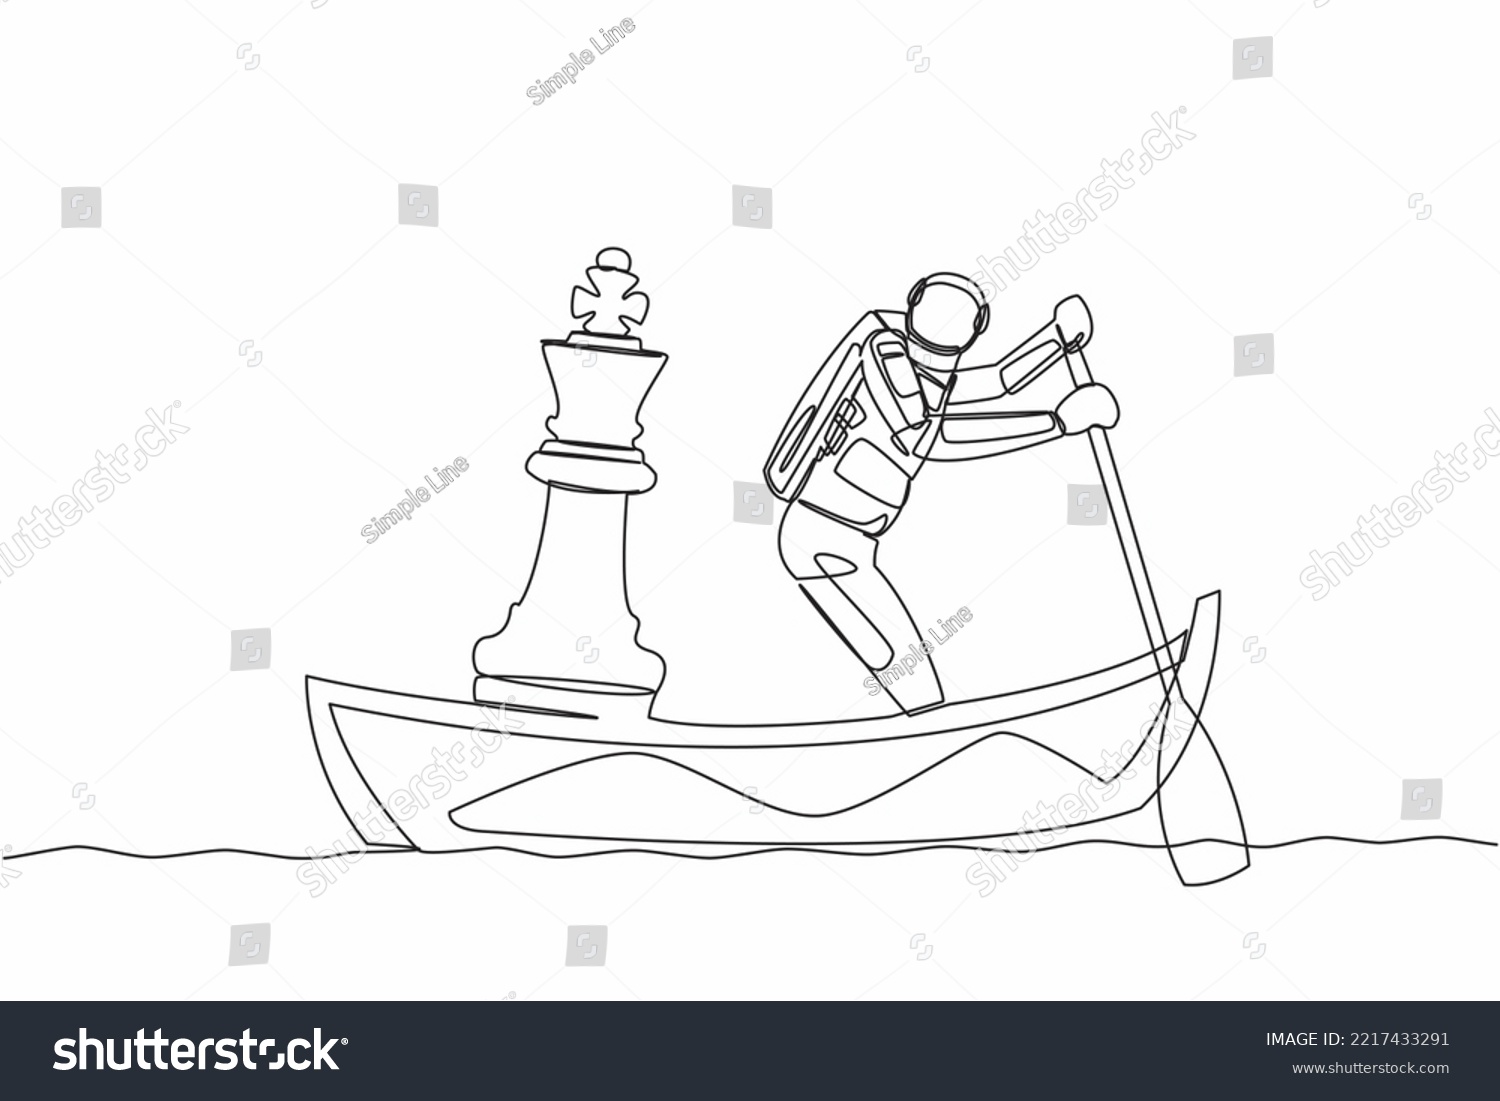 SVG of Single one line drawing astronaut sailing away on boat with chess king piece. Strategic move to plan space shuttle flight mission. Cosmic galaxy space. Continuous line draw design vector illustration svg